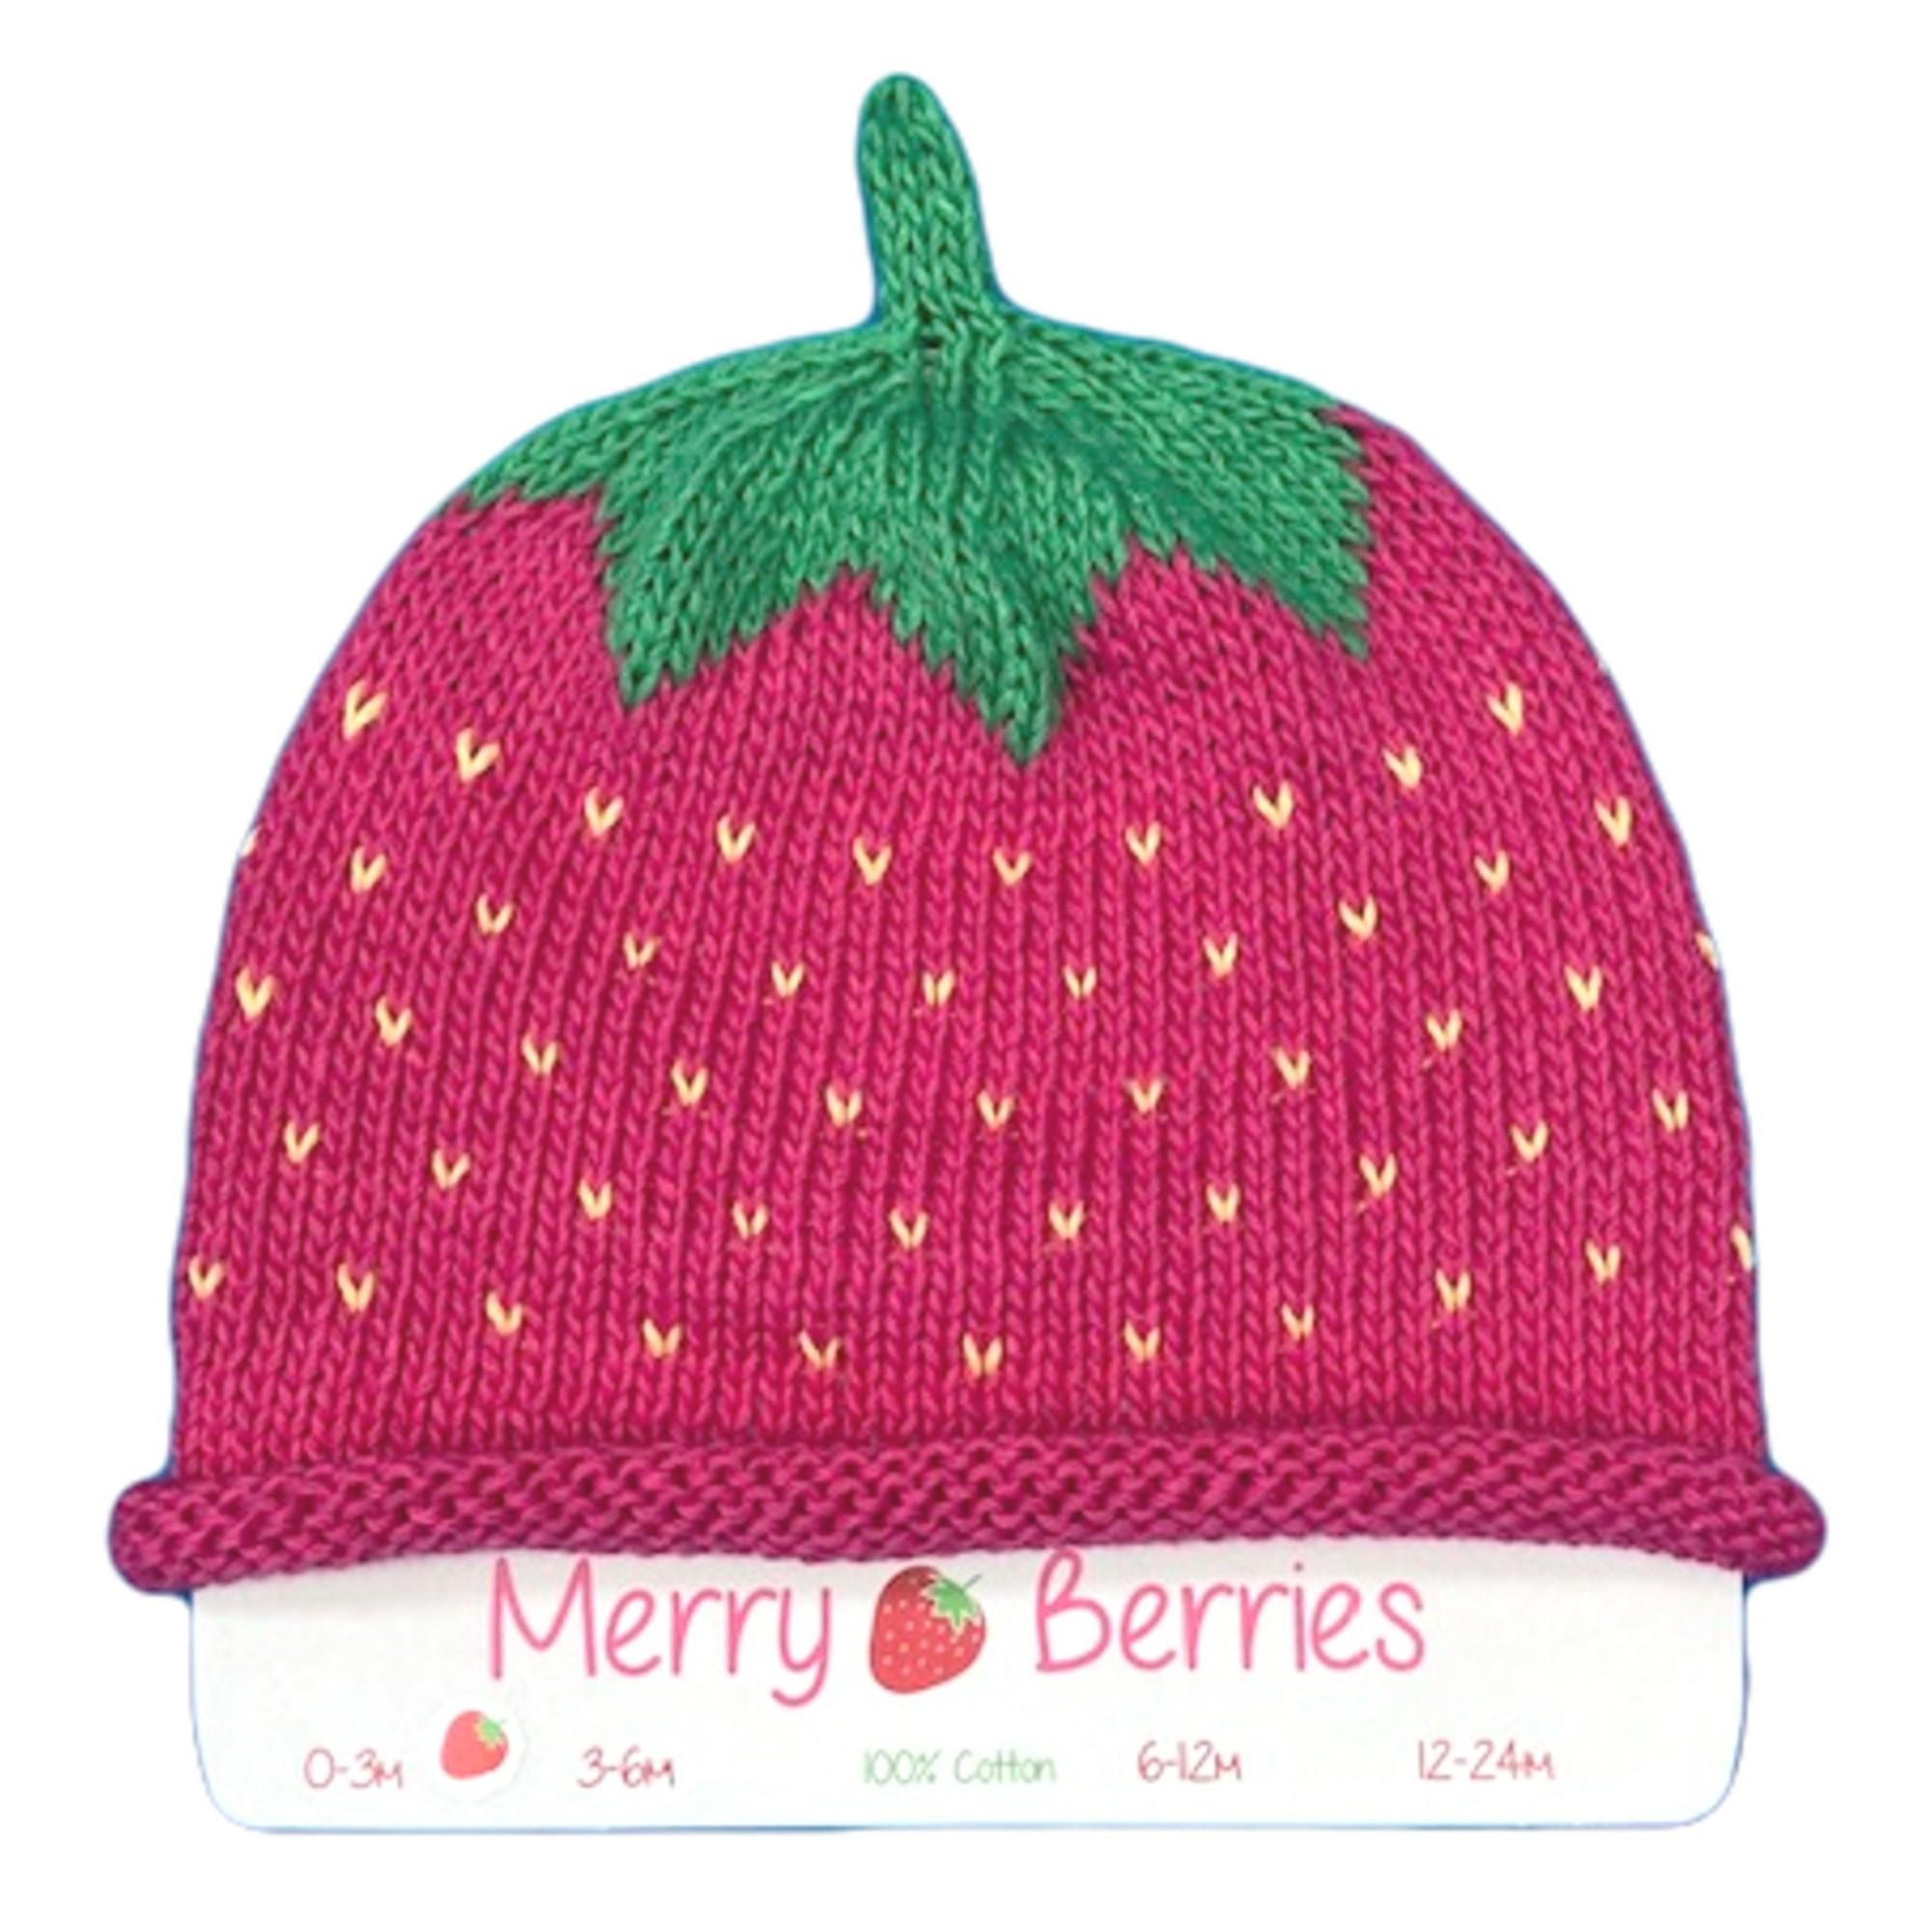 Merry Berries - Raspberry Knitted baby Hat-0-24mths-Cotton